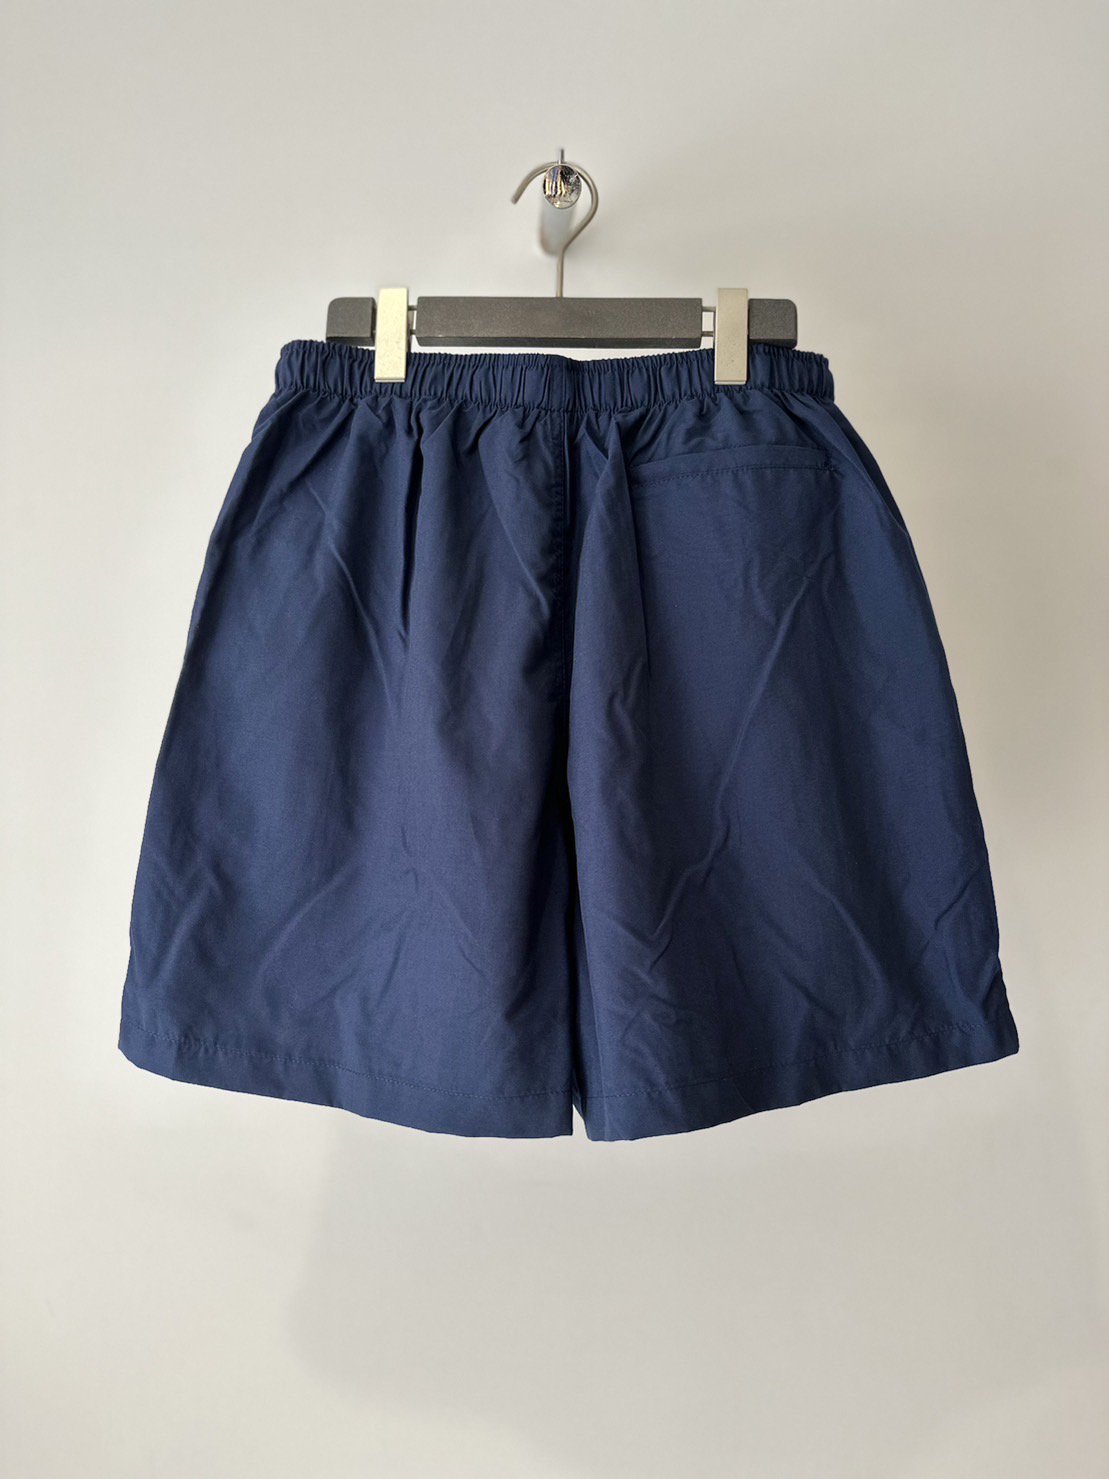 Cobra Caps<br />Microfiber All Purpose Shorts / Navy<img class='new_mark_img2' src='https://img.shop-pro.jp/img/new/icons14.gif' style='border:none;display:inline;margin:0px;padding:0px;width:auto;' />